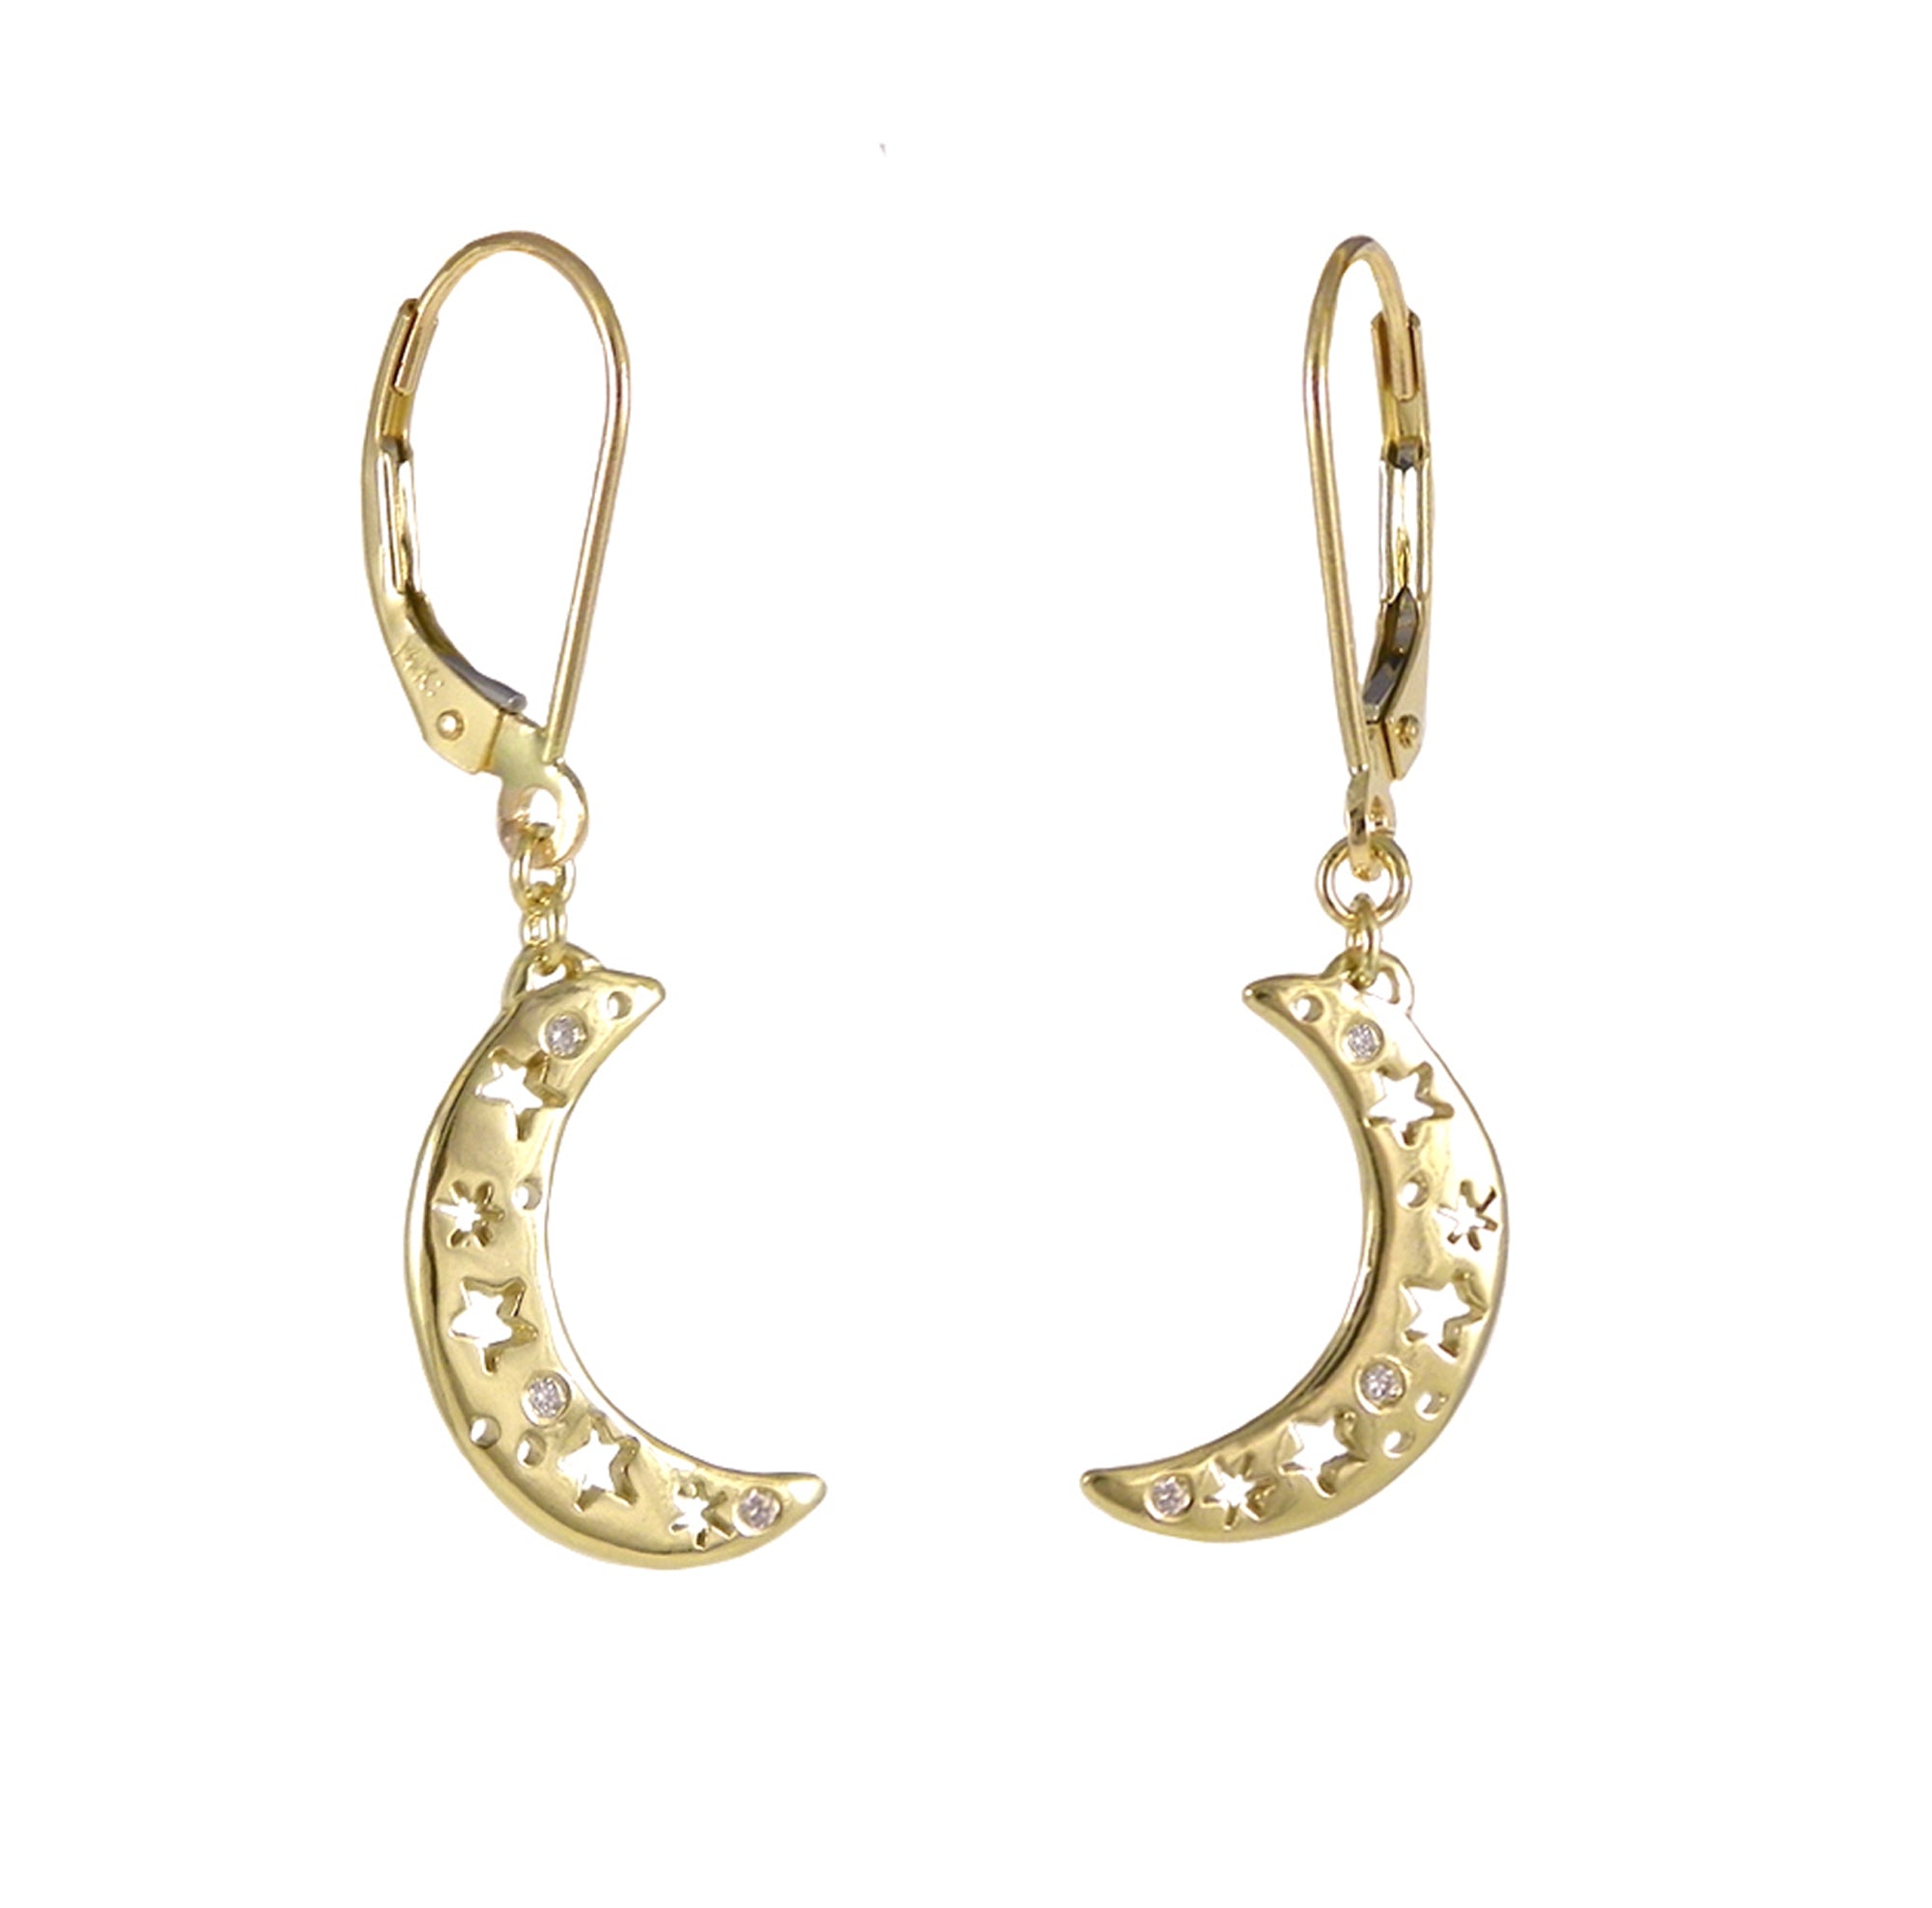 Gold Crescent Moon Earrings with Diamonds